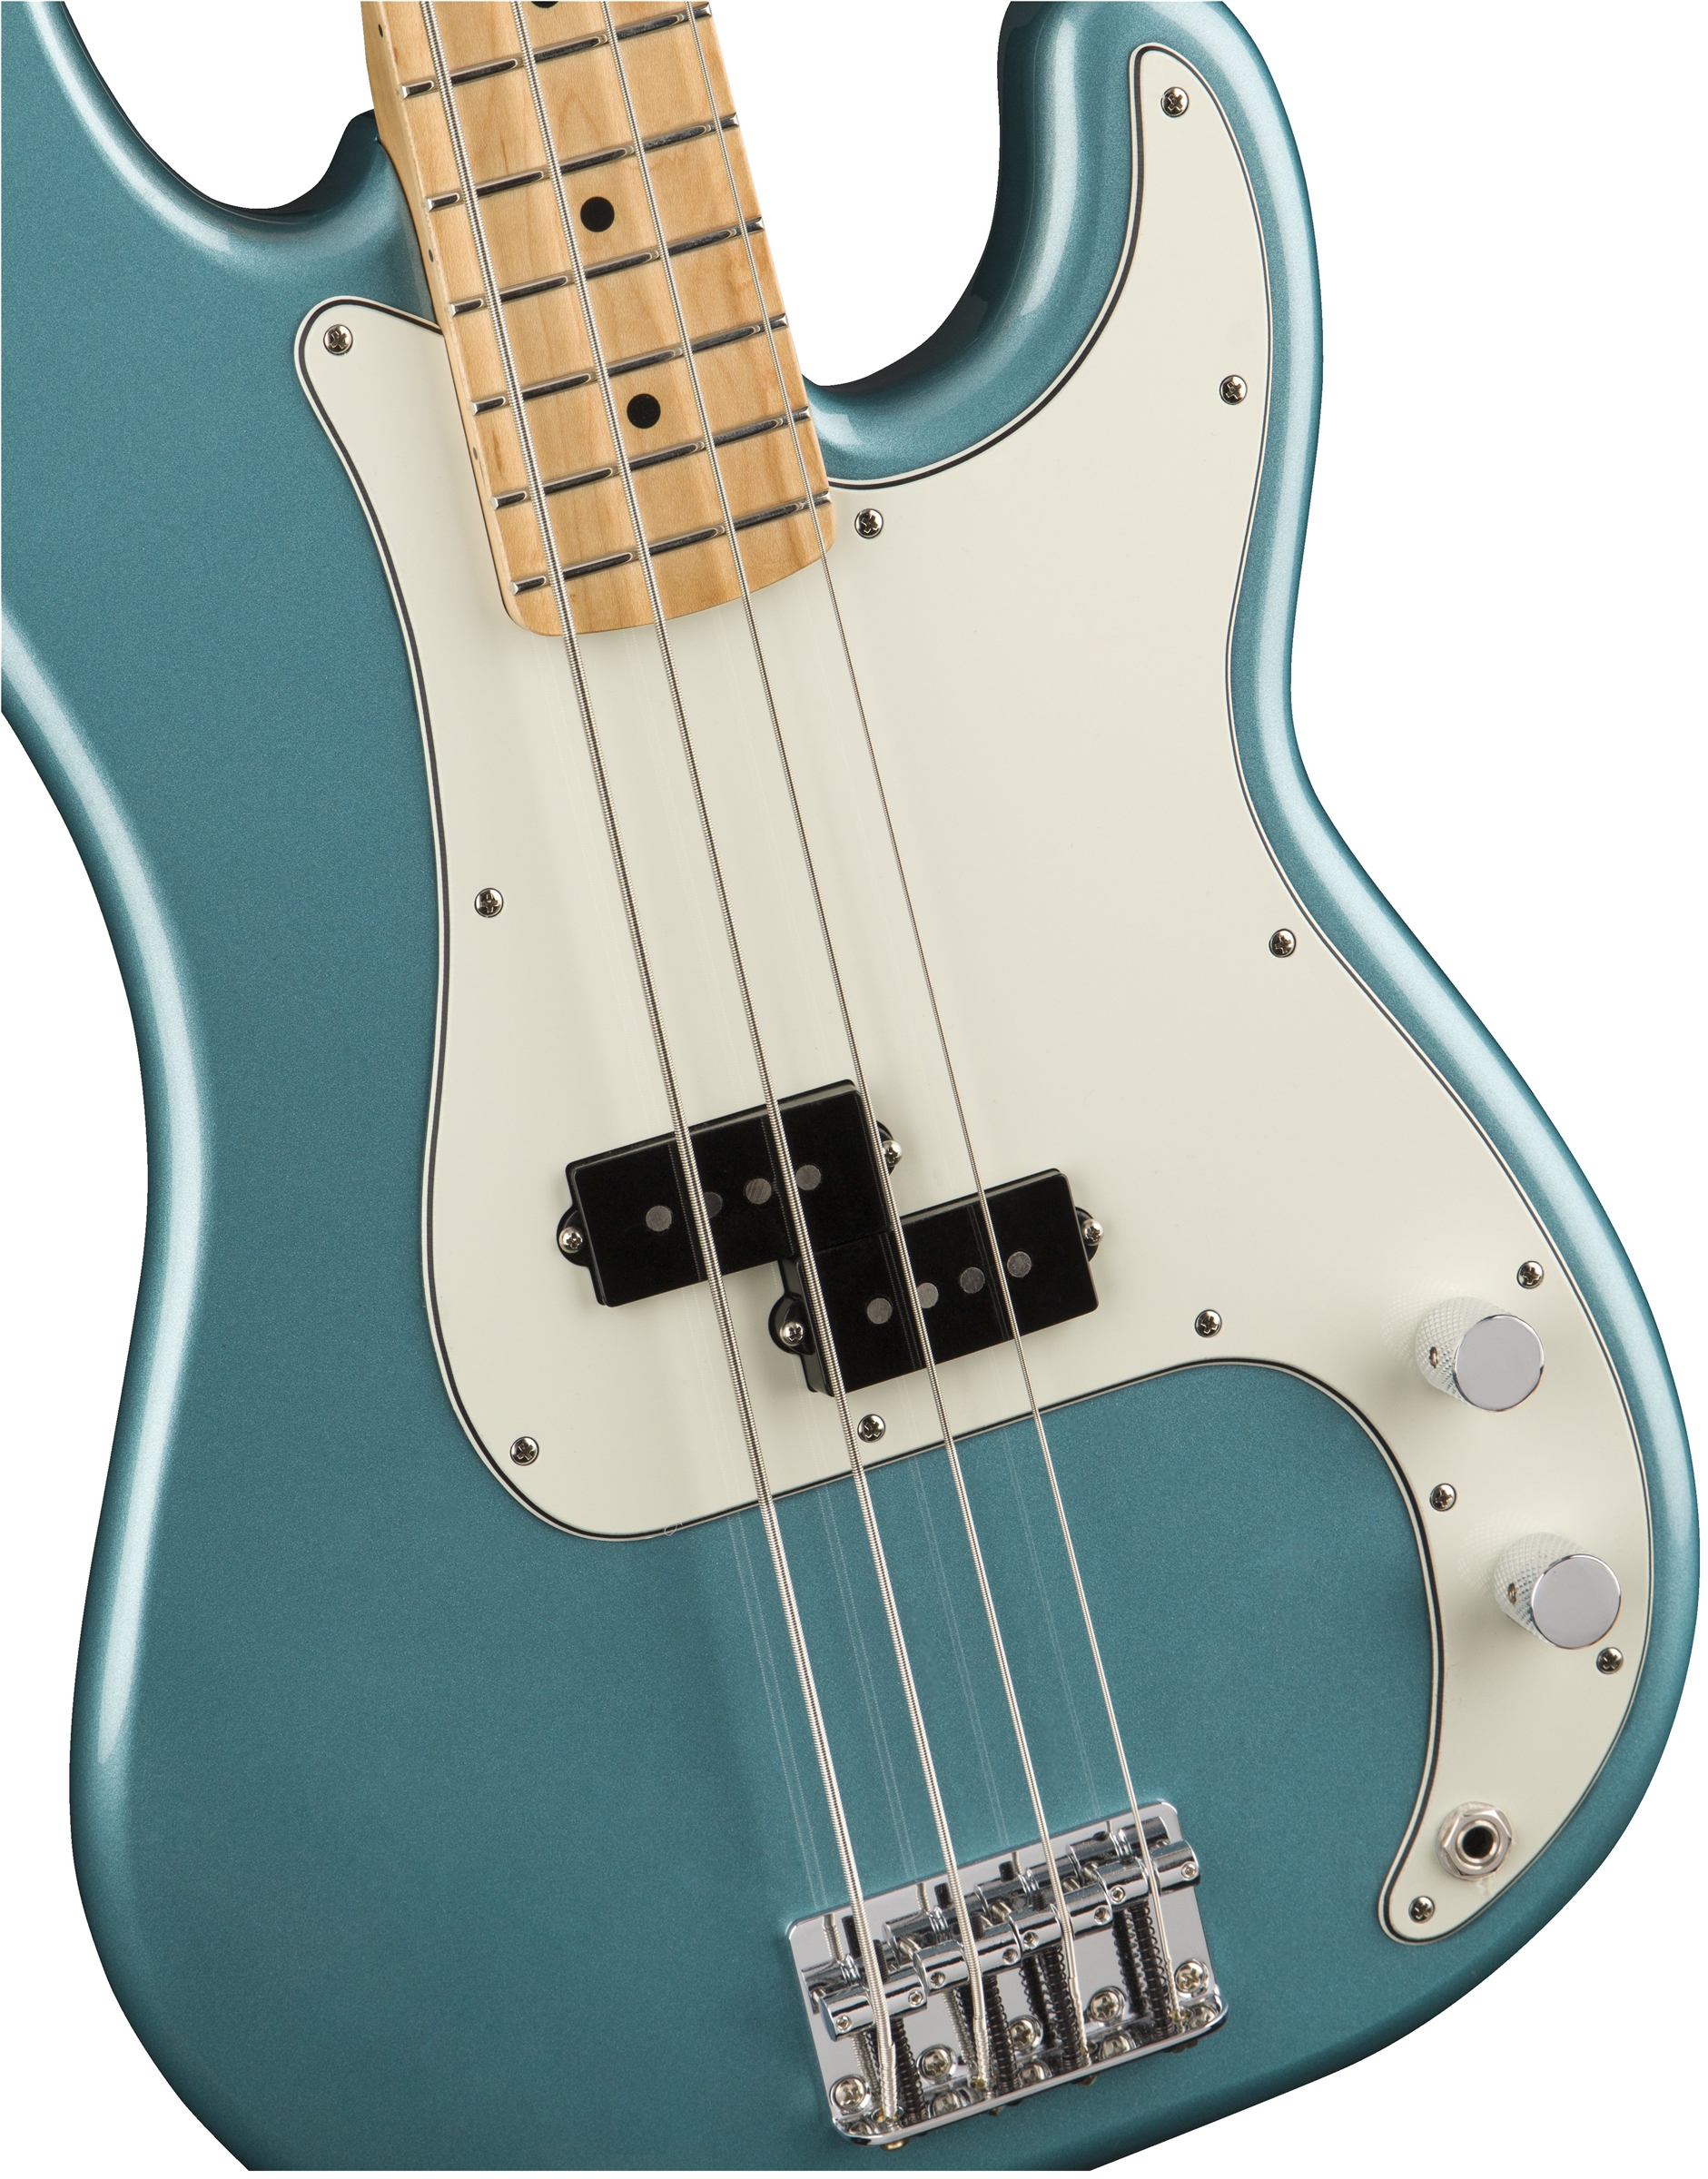 Fender Precision Bass Player Mex Mn - Tidepool - Basse Électrique Solid Body - Variation 2